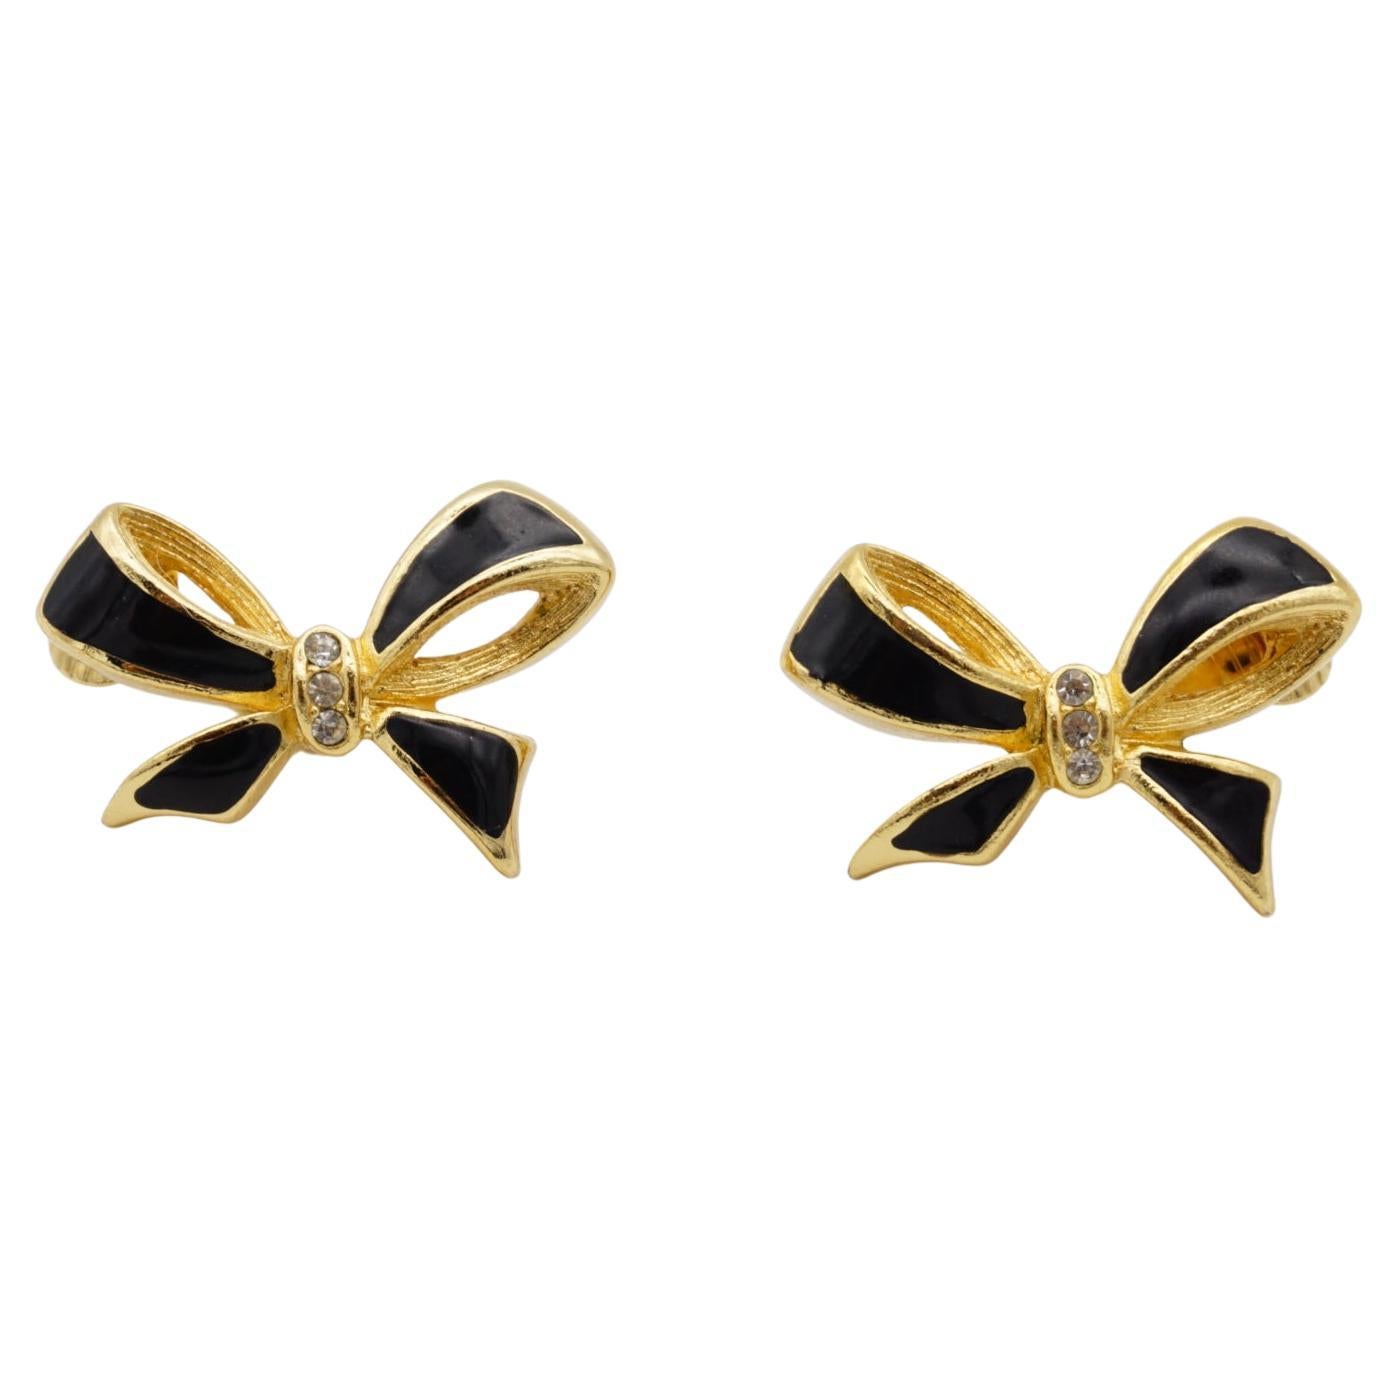 Christian Dior Vintage 1980s Black Knot Bow Butterfly Crystals Clip On Earrings